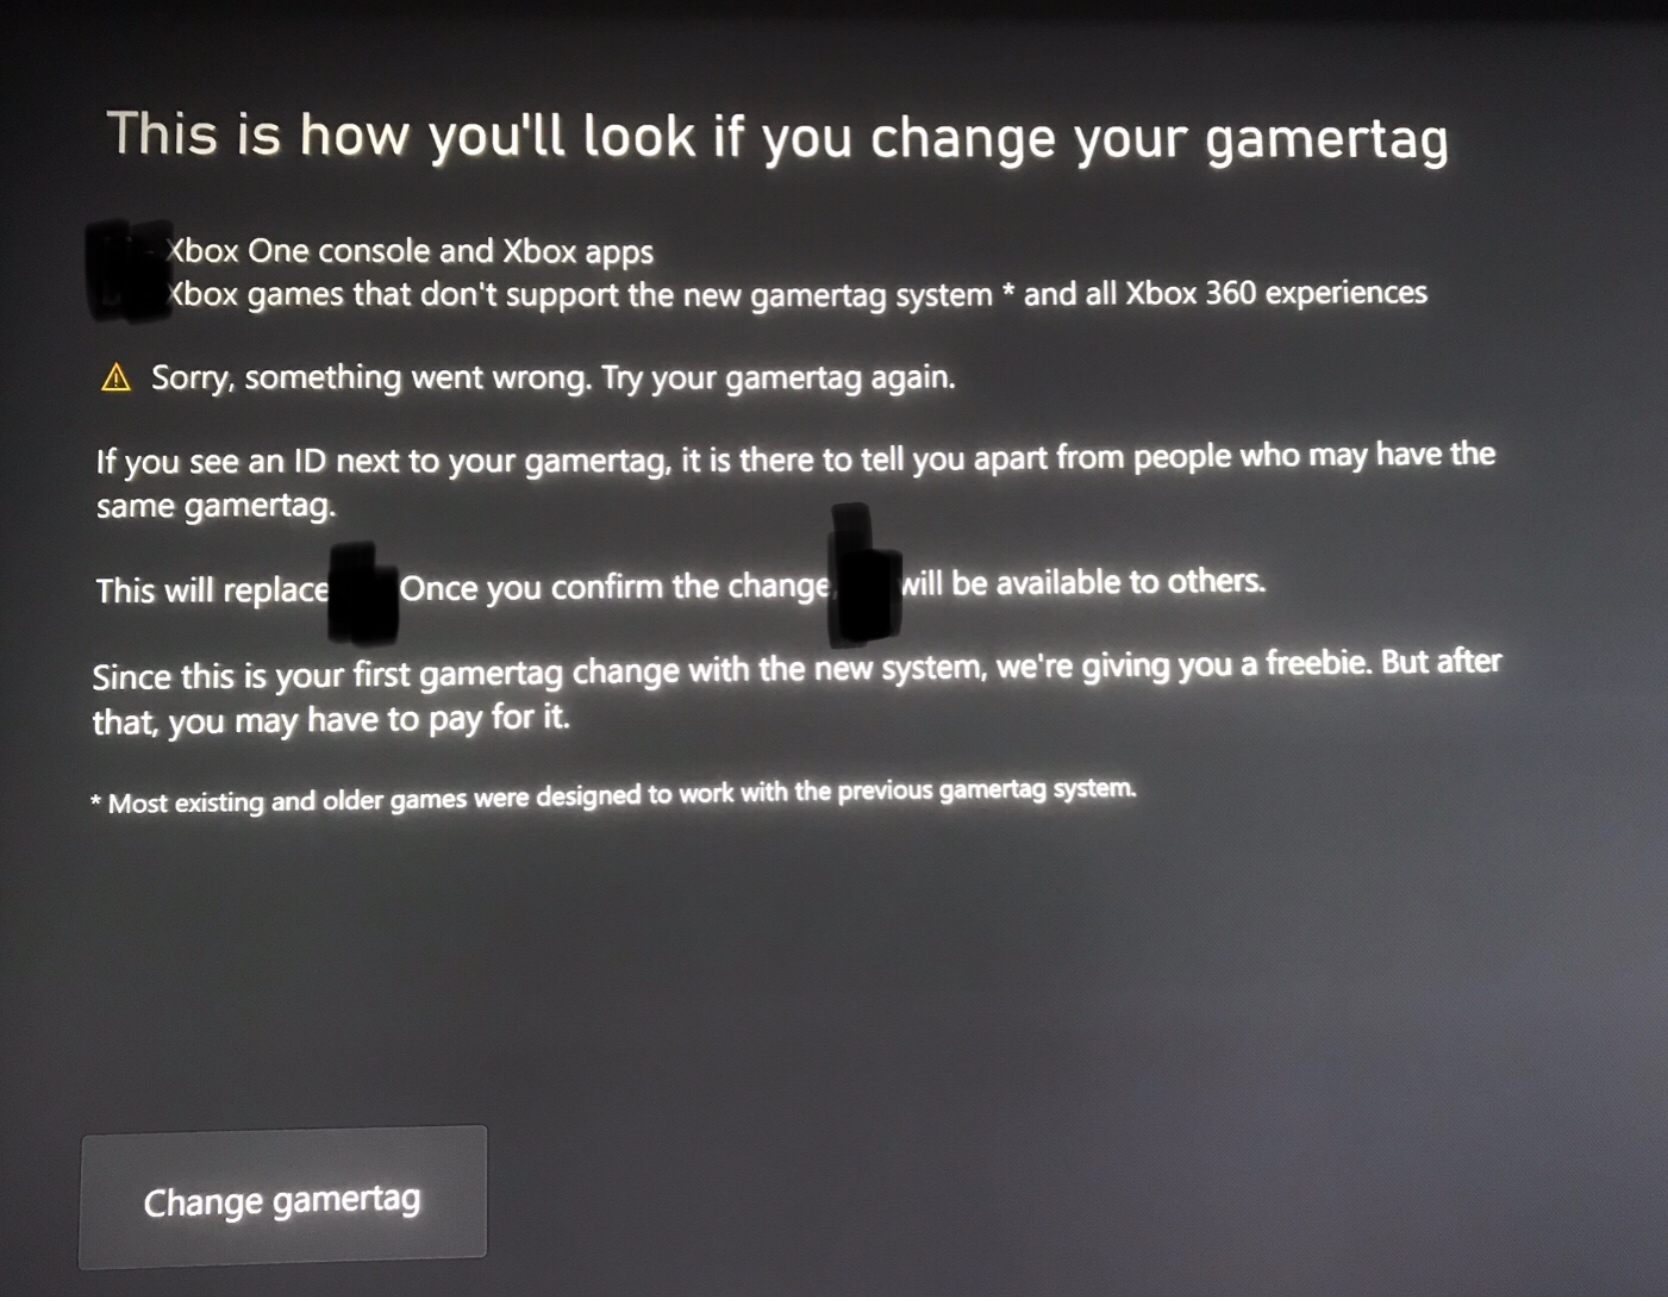 You have to pay to change your gamertag. : r/assholedesign